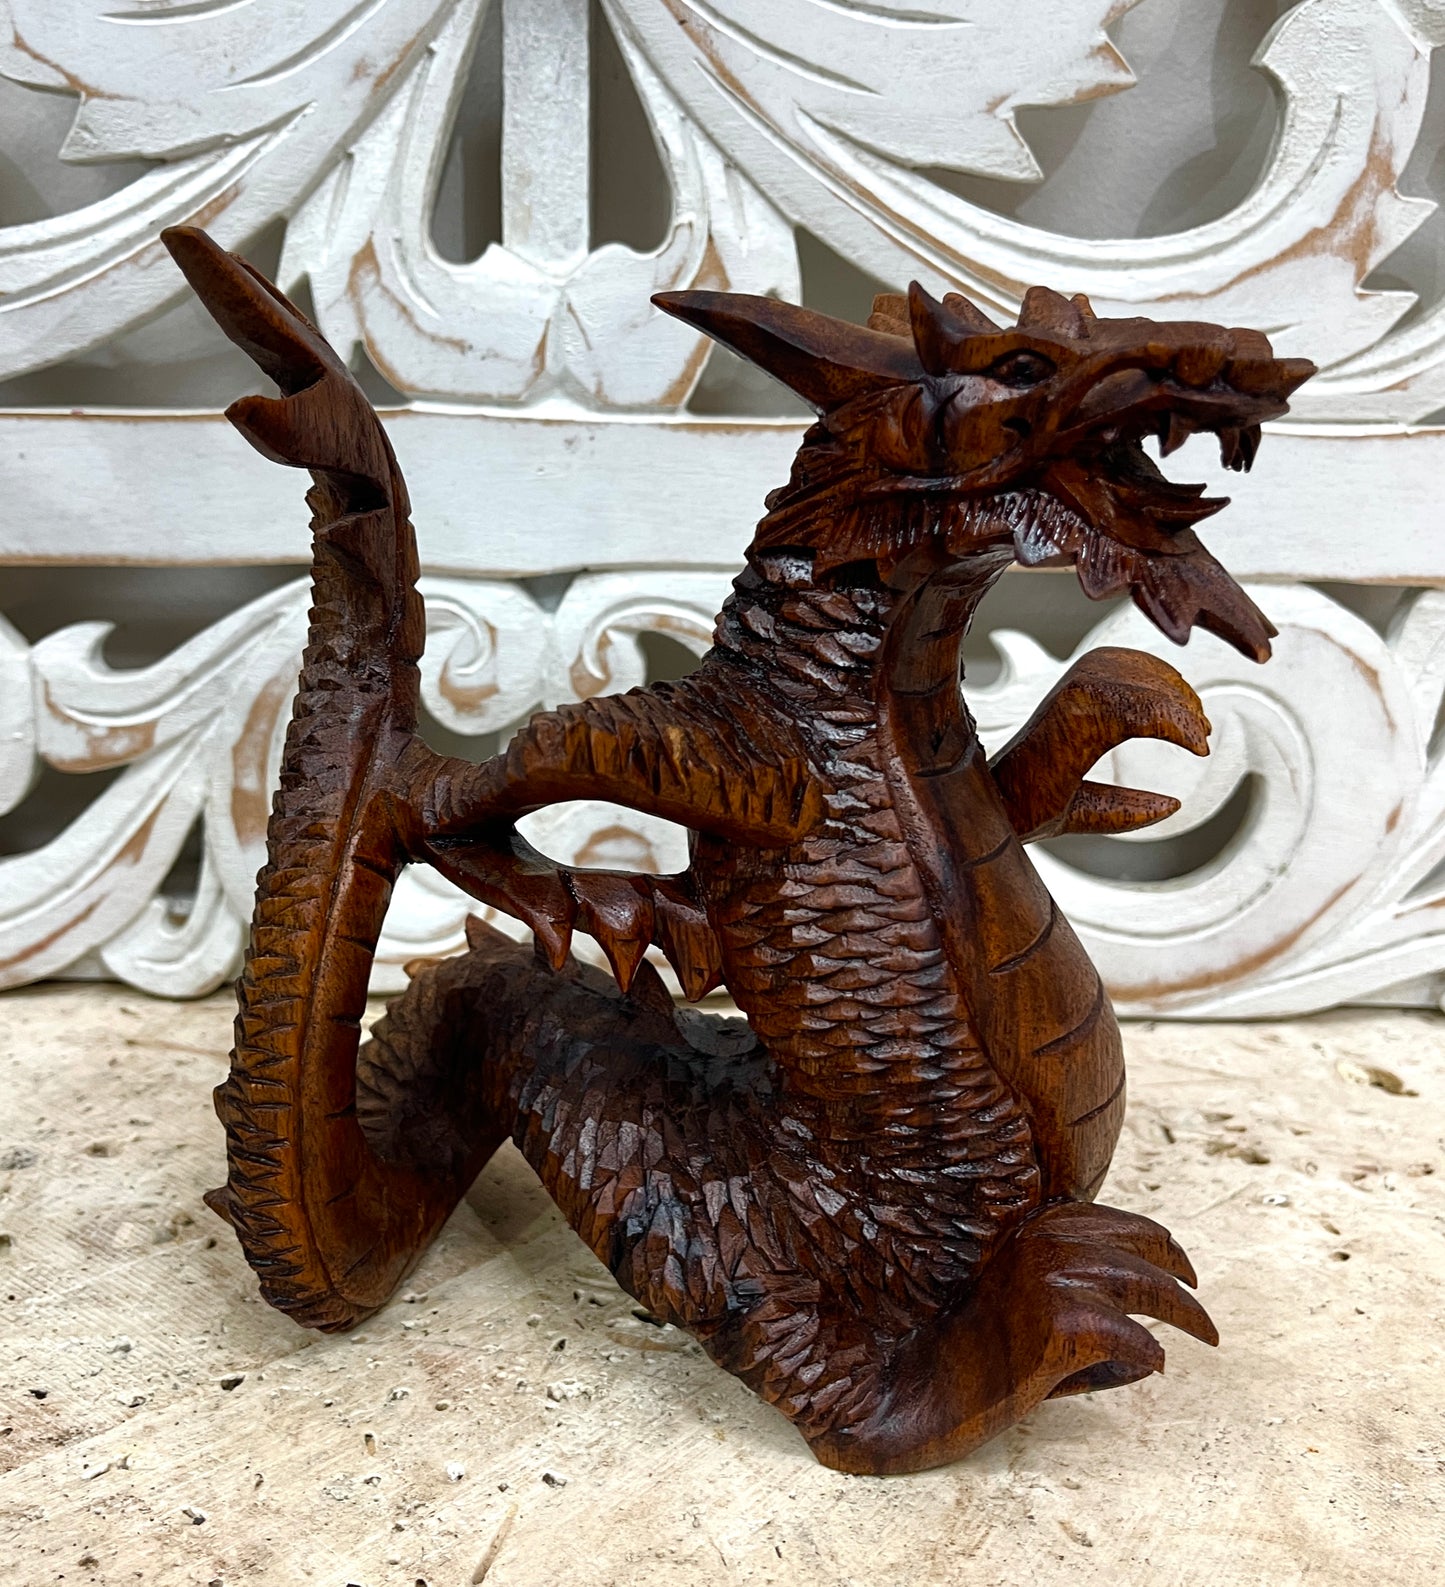 Dragon Intricate Wood carvings - 3 Sizes Available